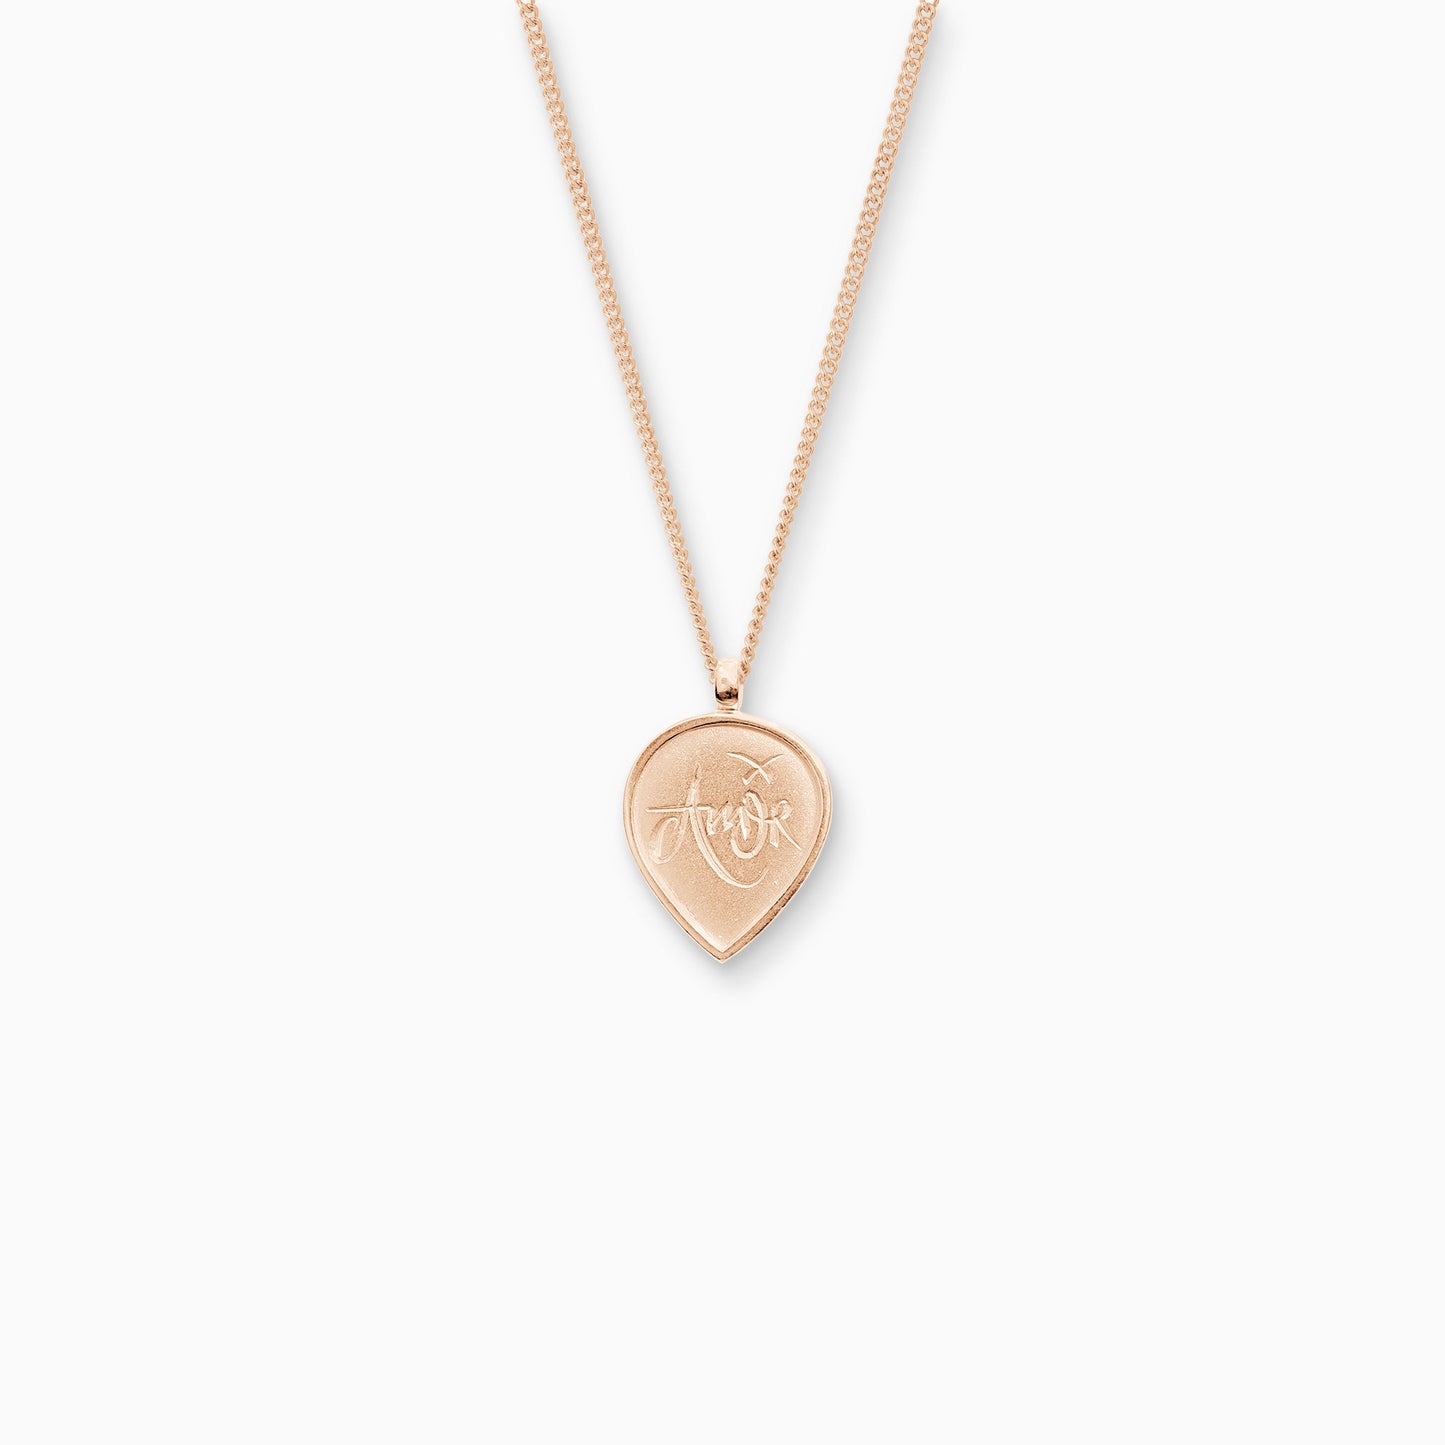 18ct Fairtrade rose gold teardrop shaped pendant, 25cm x 16mm on a 45cm fine curb chain. Amor, the Latin for Love is inscribed in a handwritten script on the front of the pendant.